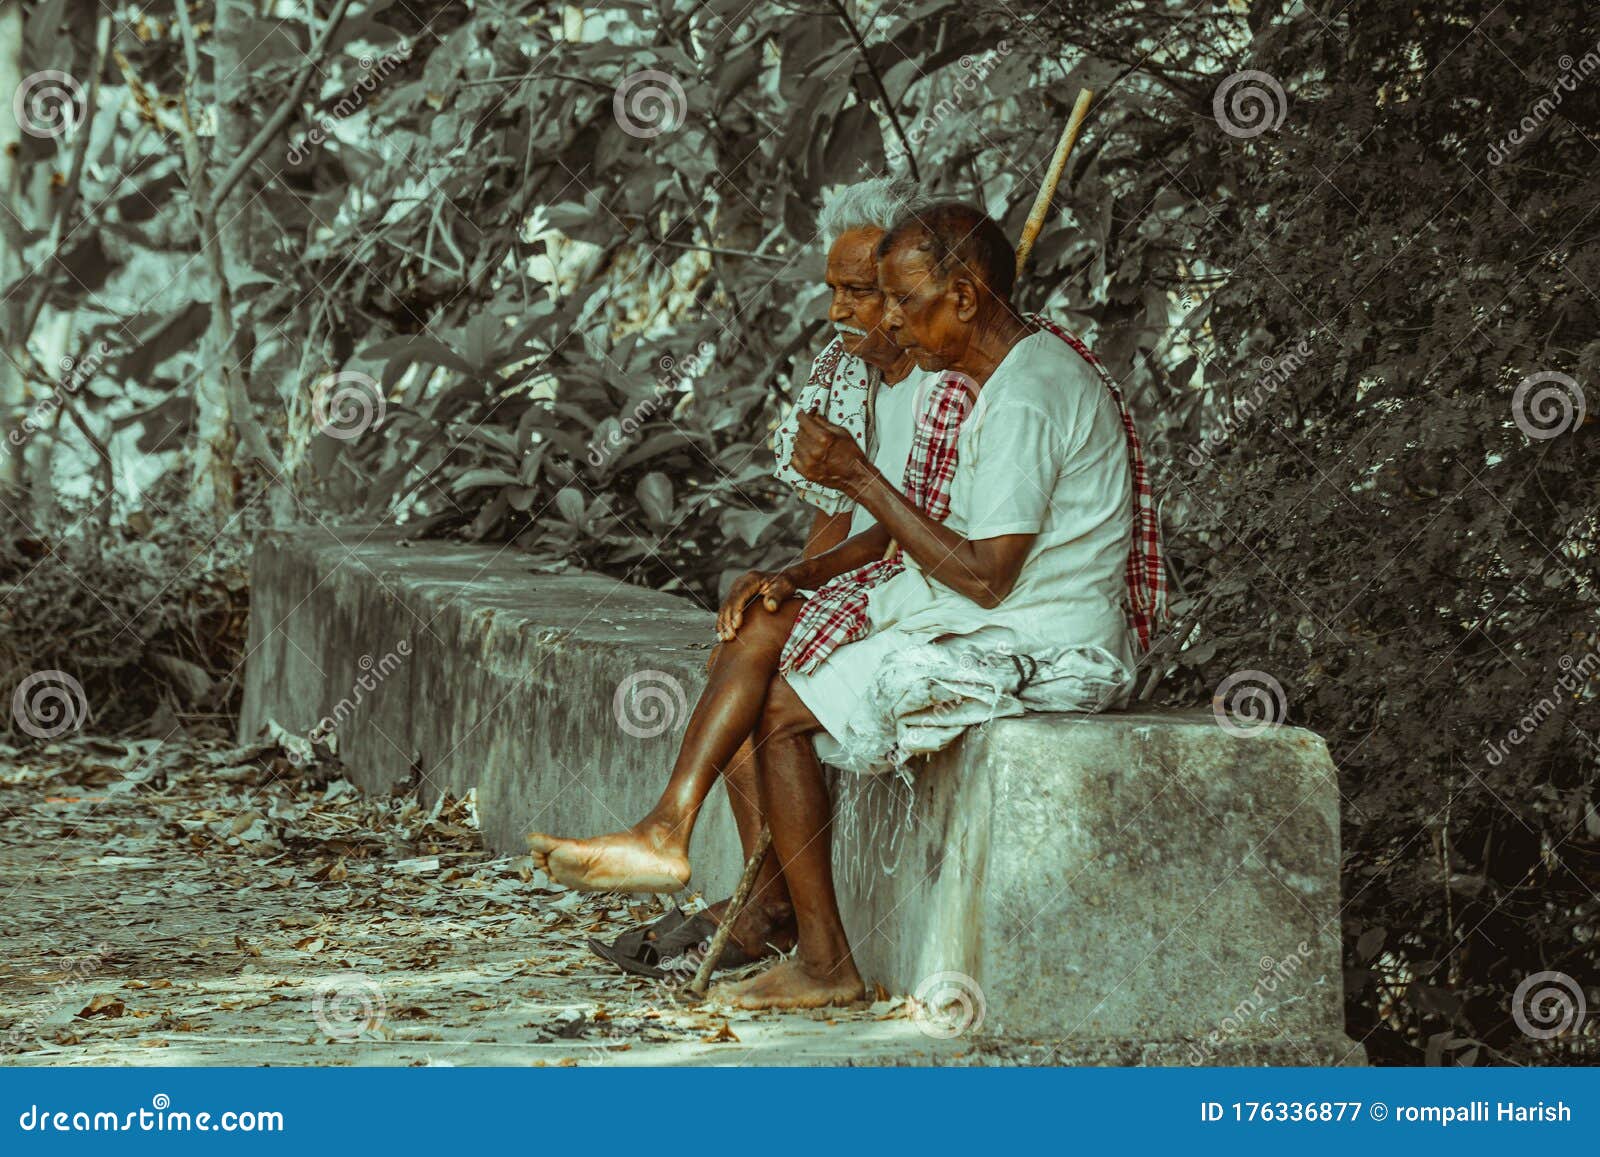 Indian Village Old Couple Indian Village Old Couple Editorial Photography Image Of Indian 